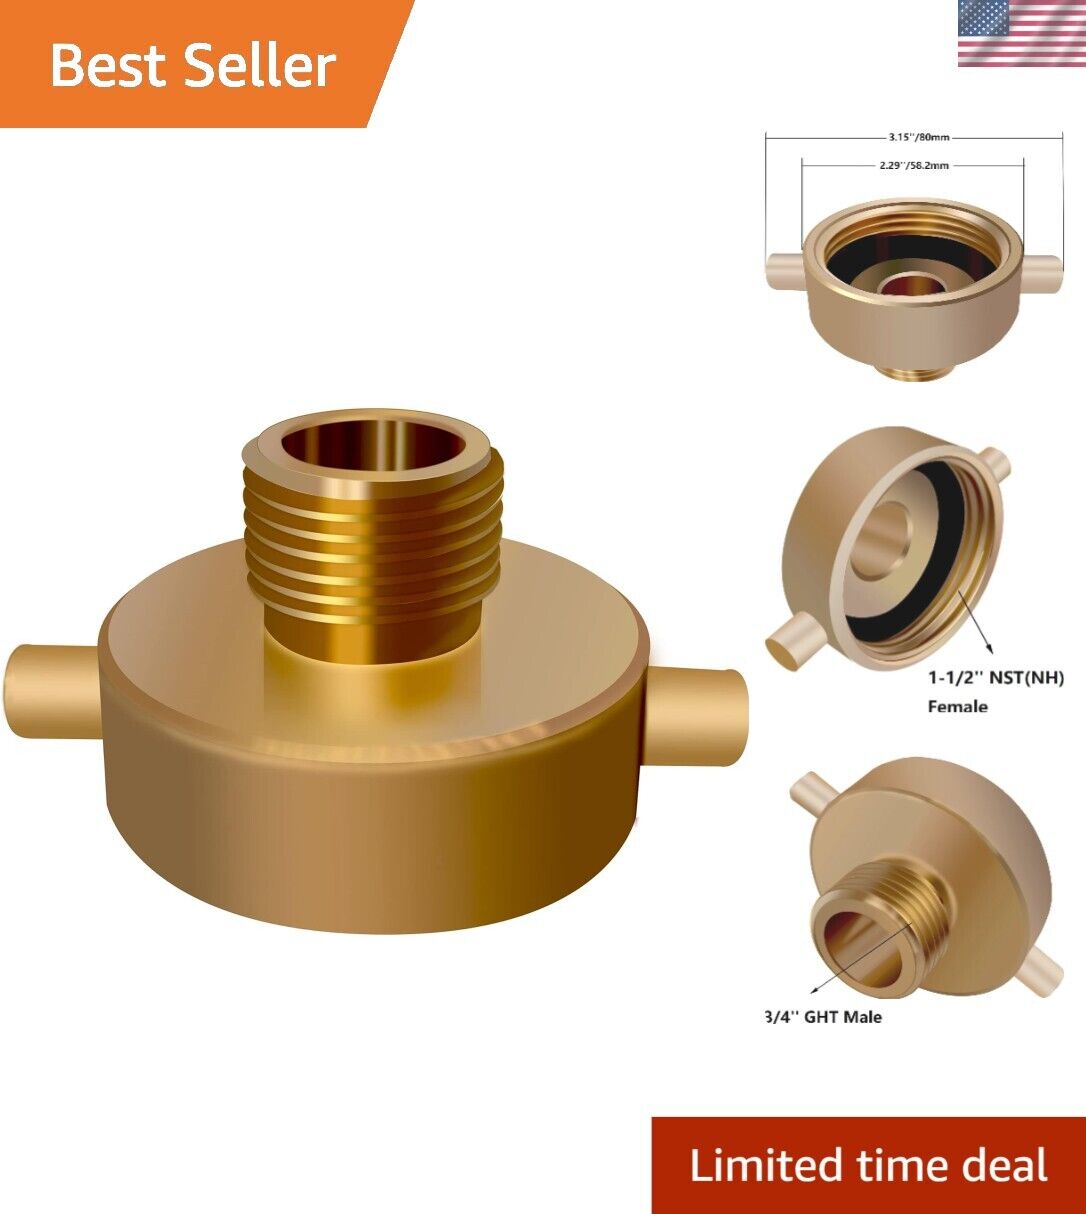 Corrosion-Resistant Brass Fire Hose Adapter for Reliable Fire Hydrant Connection